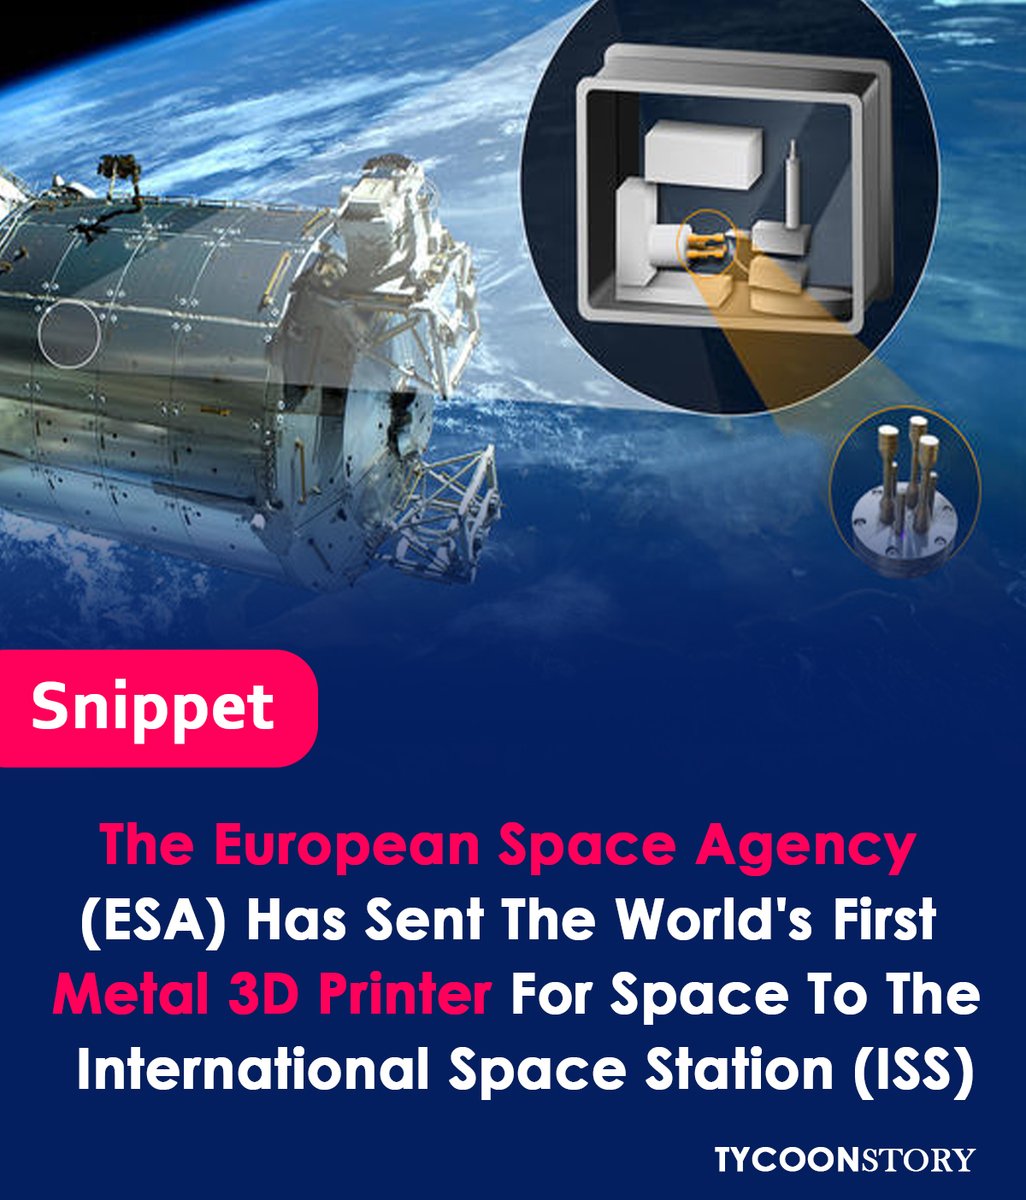 After the European Space Agency (ESA) sent world's first metal 3D printing to the International Space Station (ISS), will soon be conducted in orbit.
#ESA #ISS #metal3dprinting #technology #orbit #Airbus #Space #manufacturing #Automation #laser @Space_Station